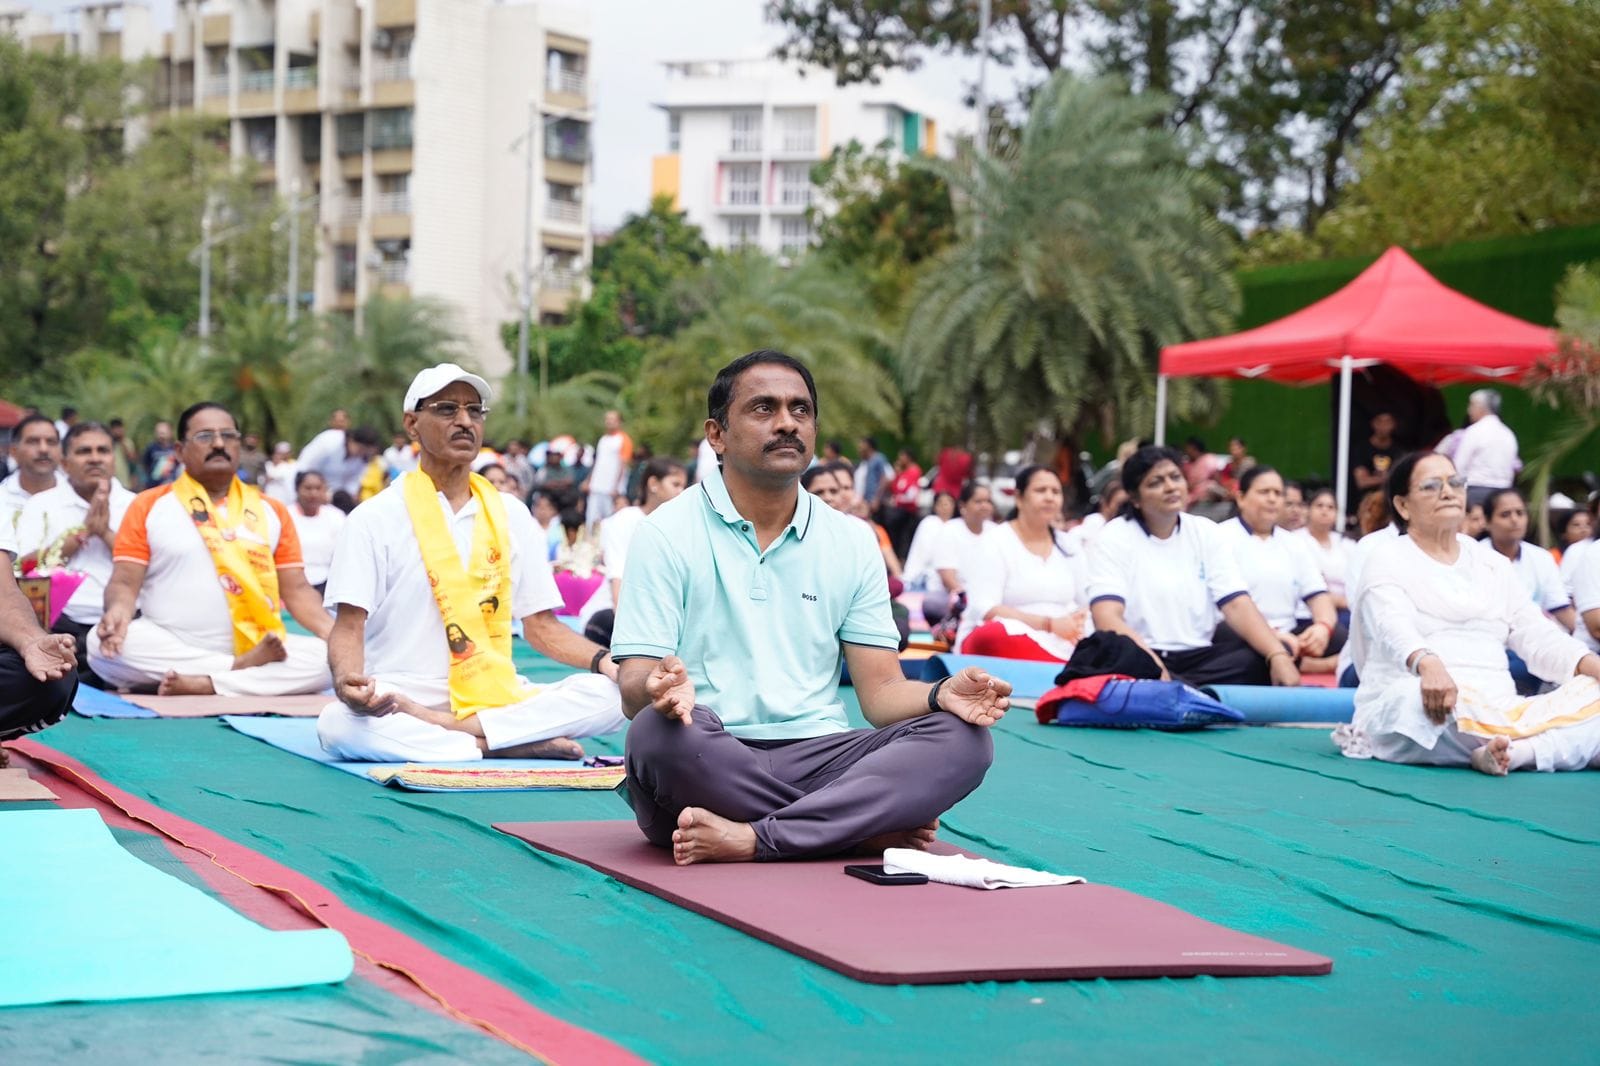 The mantra of healthy living… Let us resolve to practice yoga all the time.